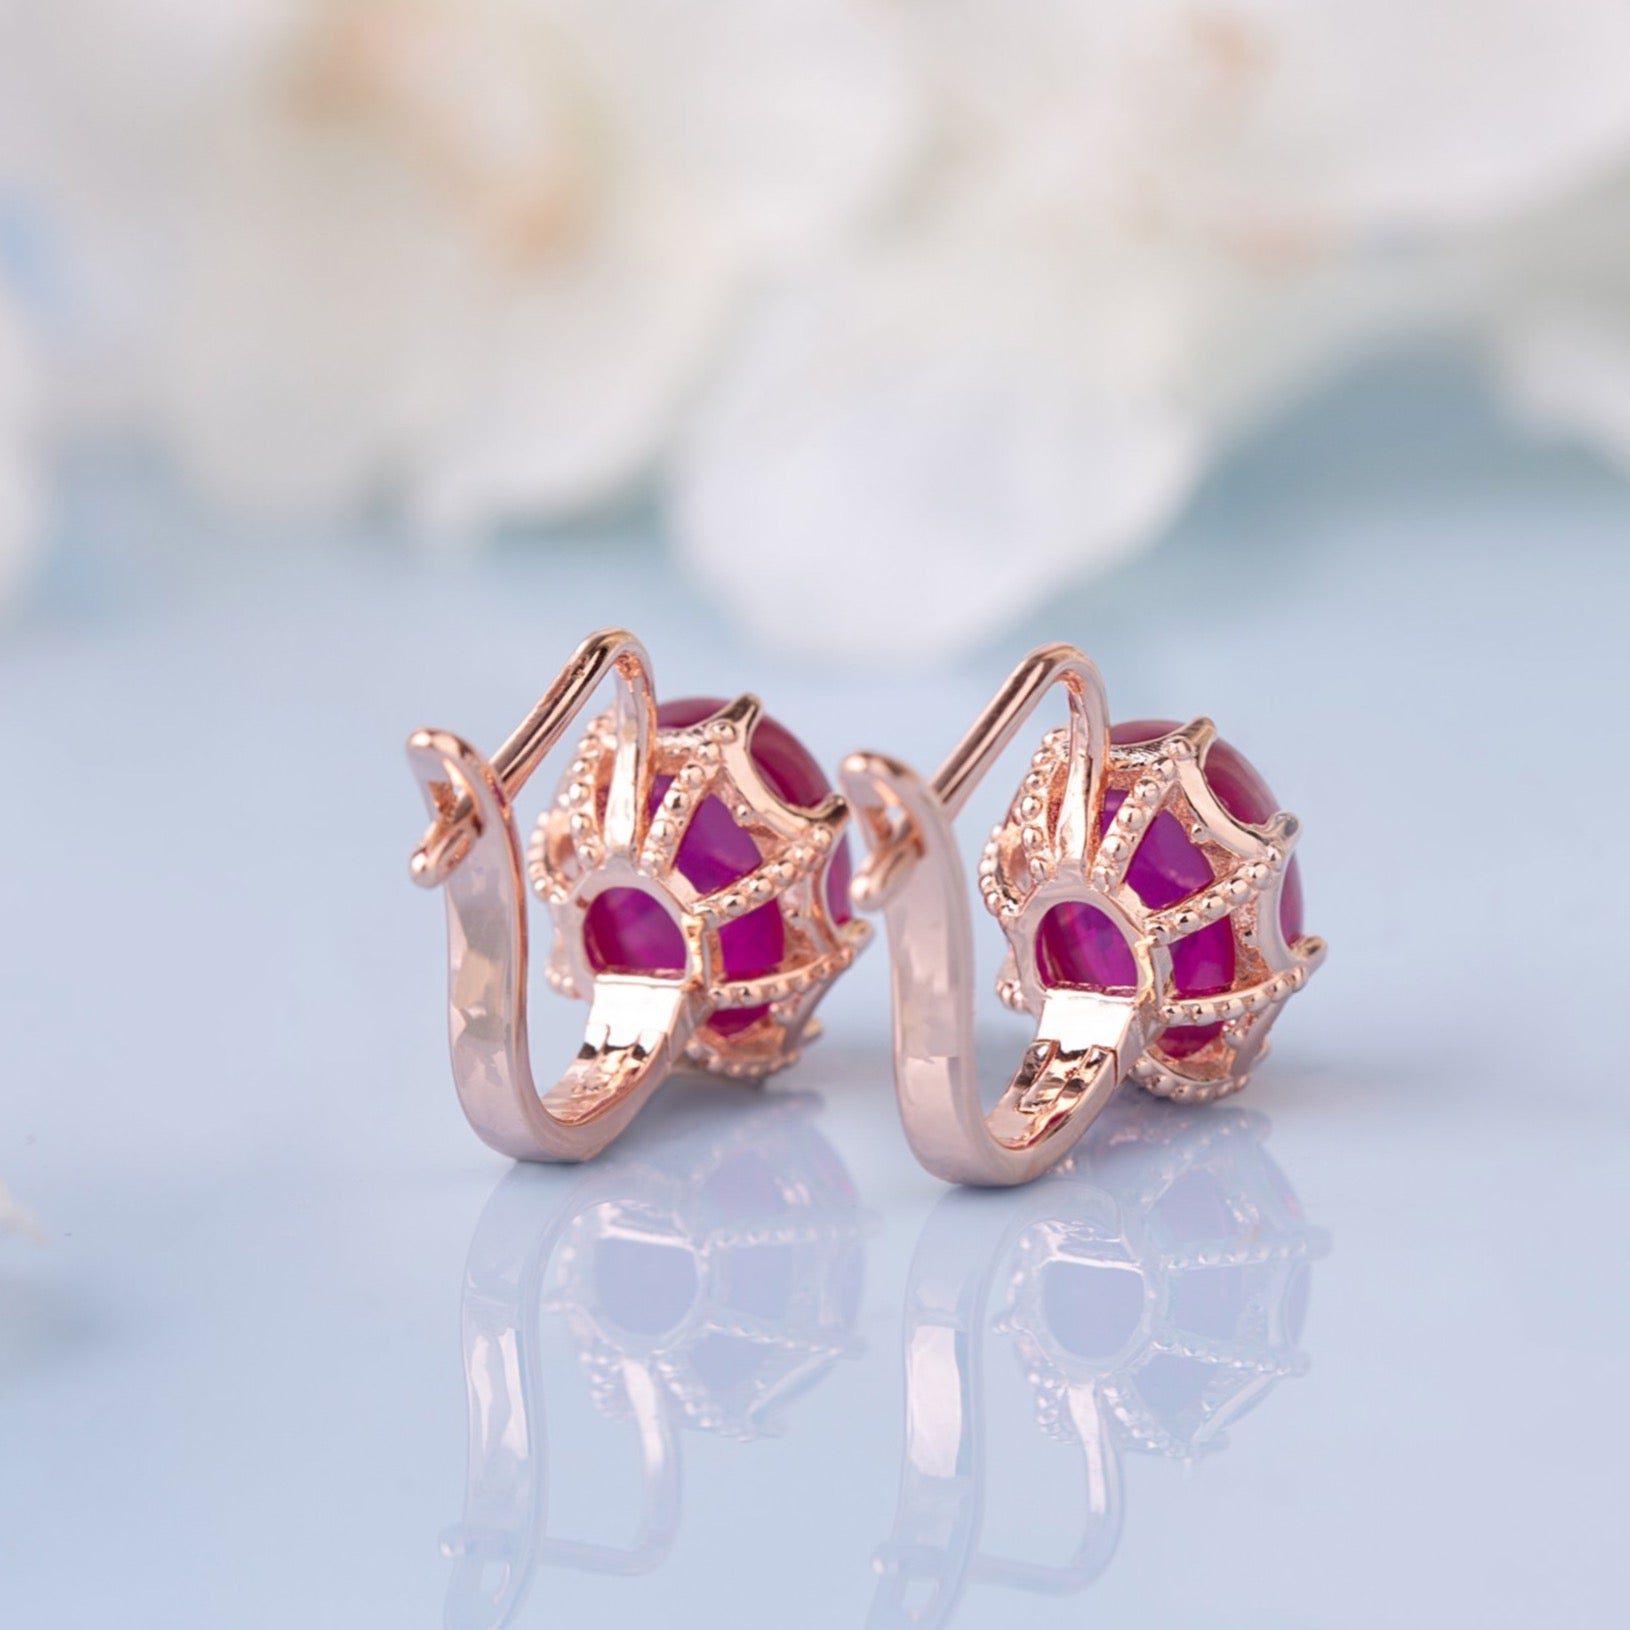 Two Red Ruby vintage earrings from the behind